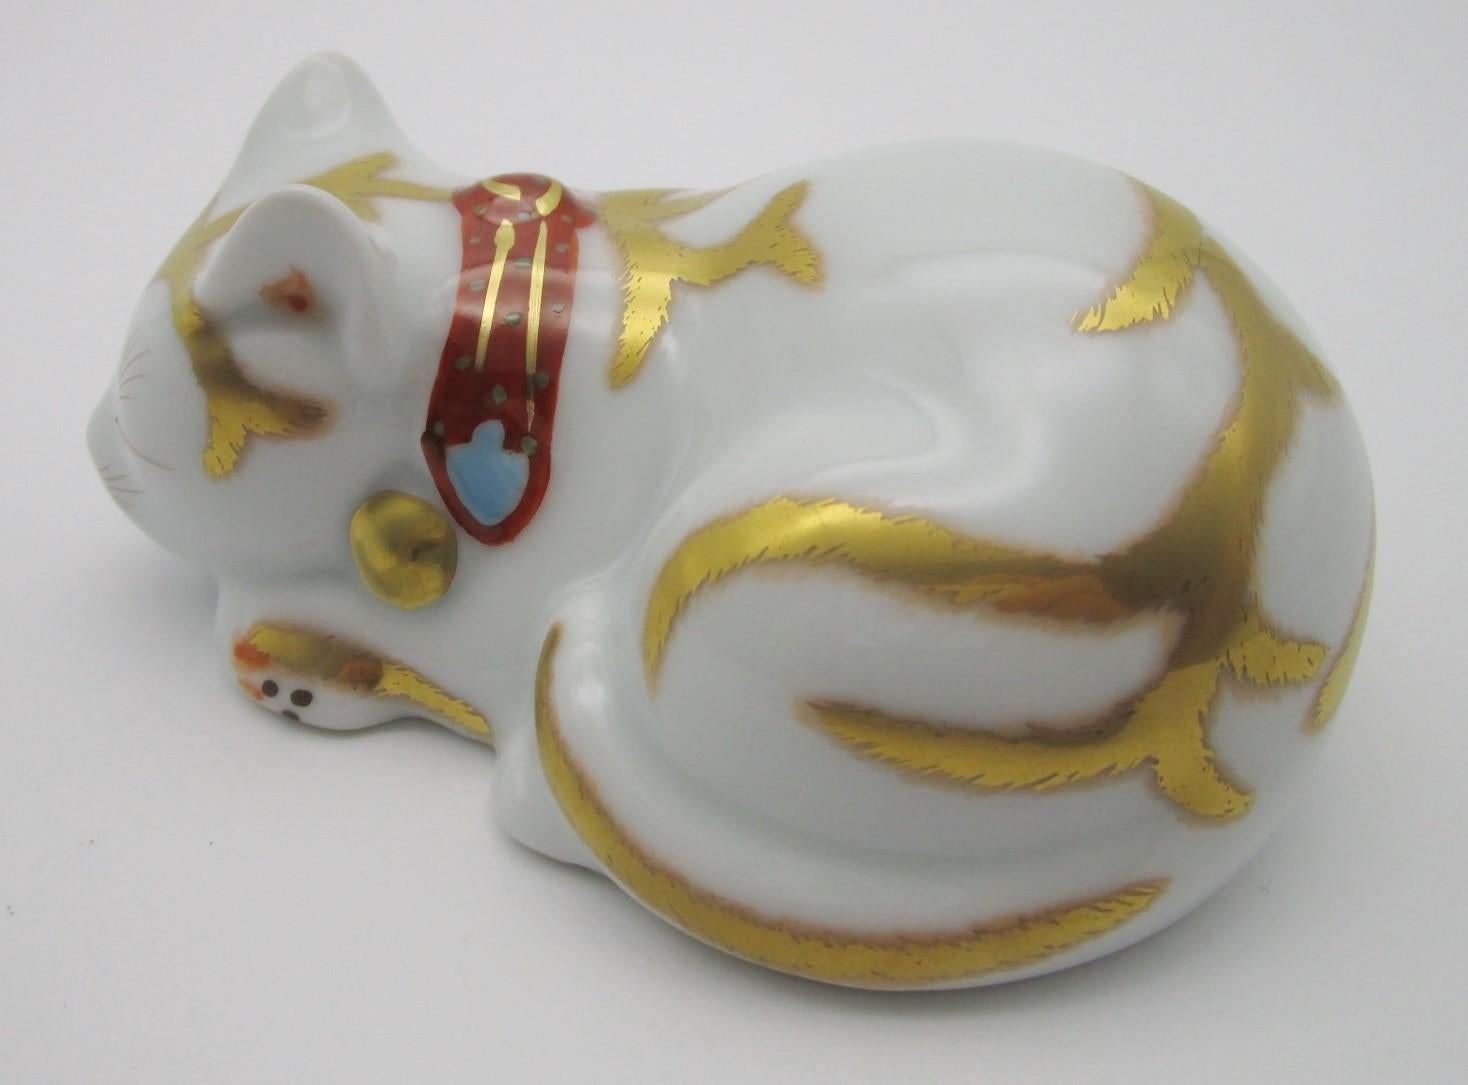 Charming contemporary Japanese sleeping cat in fine pure white porcelain with generous gold details, inspired by the small wooden sculpture at the entrance of Toshougu shrine in Nikko, Japan, by the acclaimed sculpture artist and architect Hidari